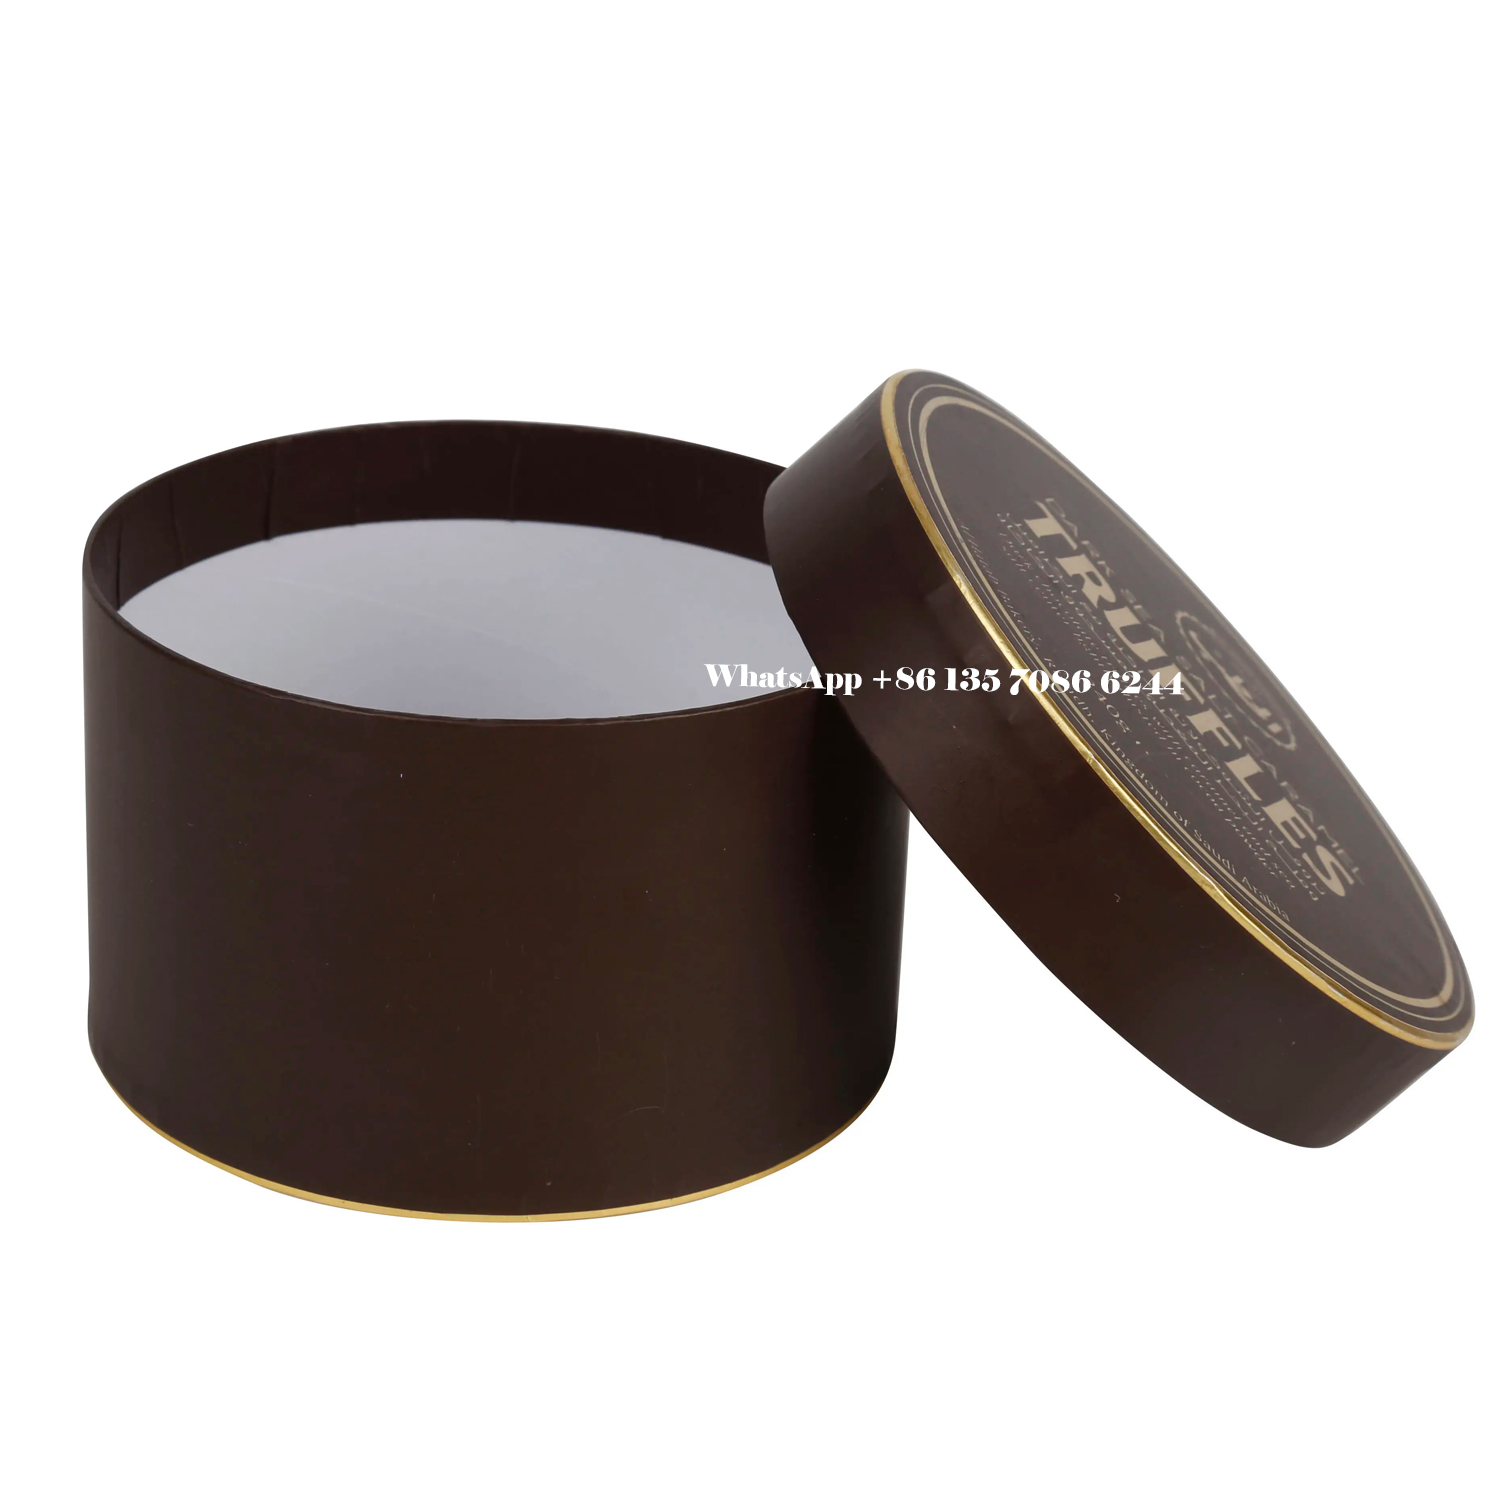  Decorative Custom Truffle Paper Tube Round Boxes Packaging  